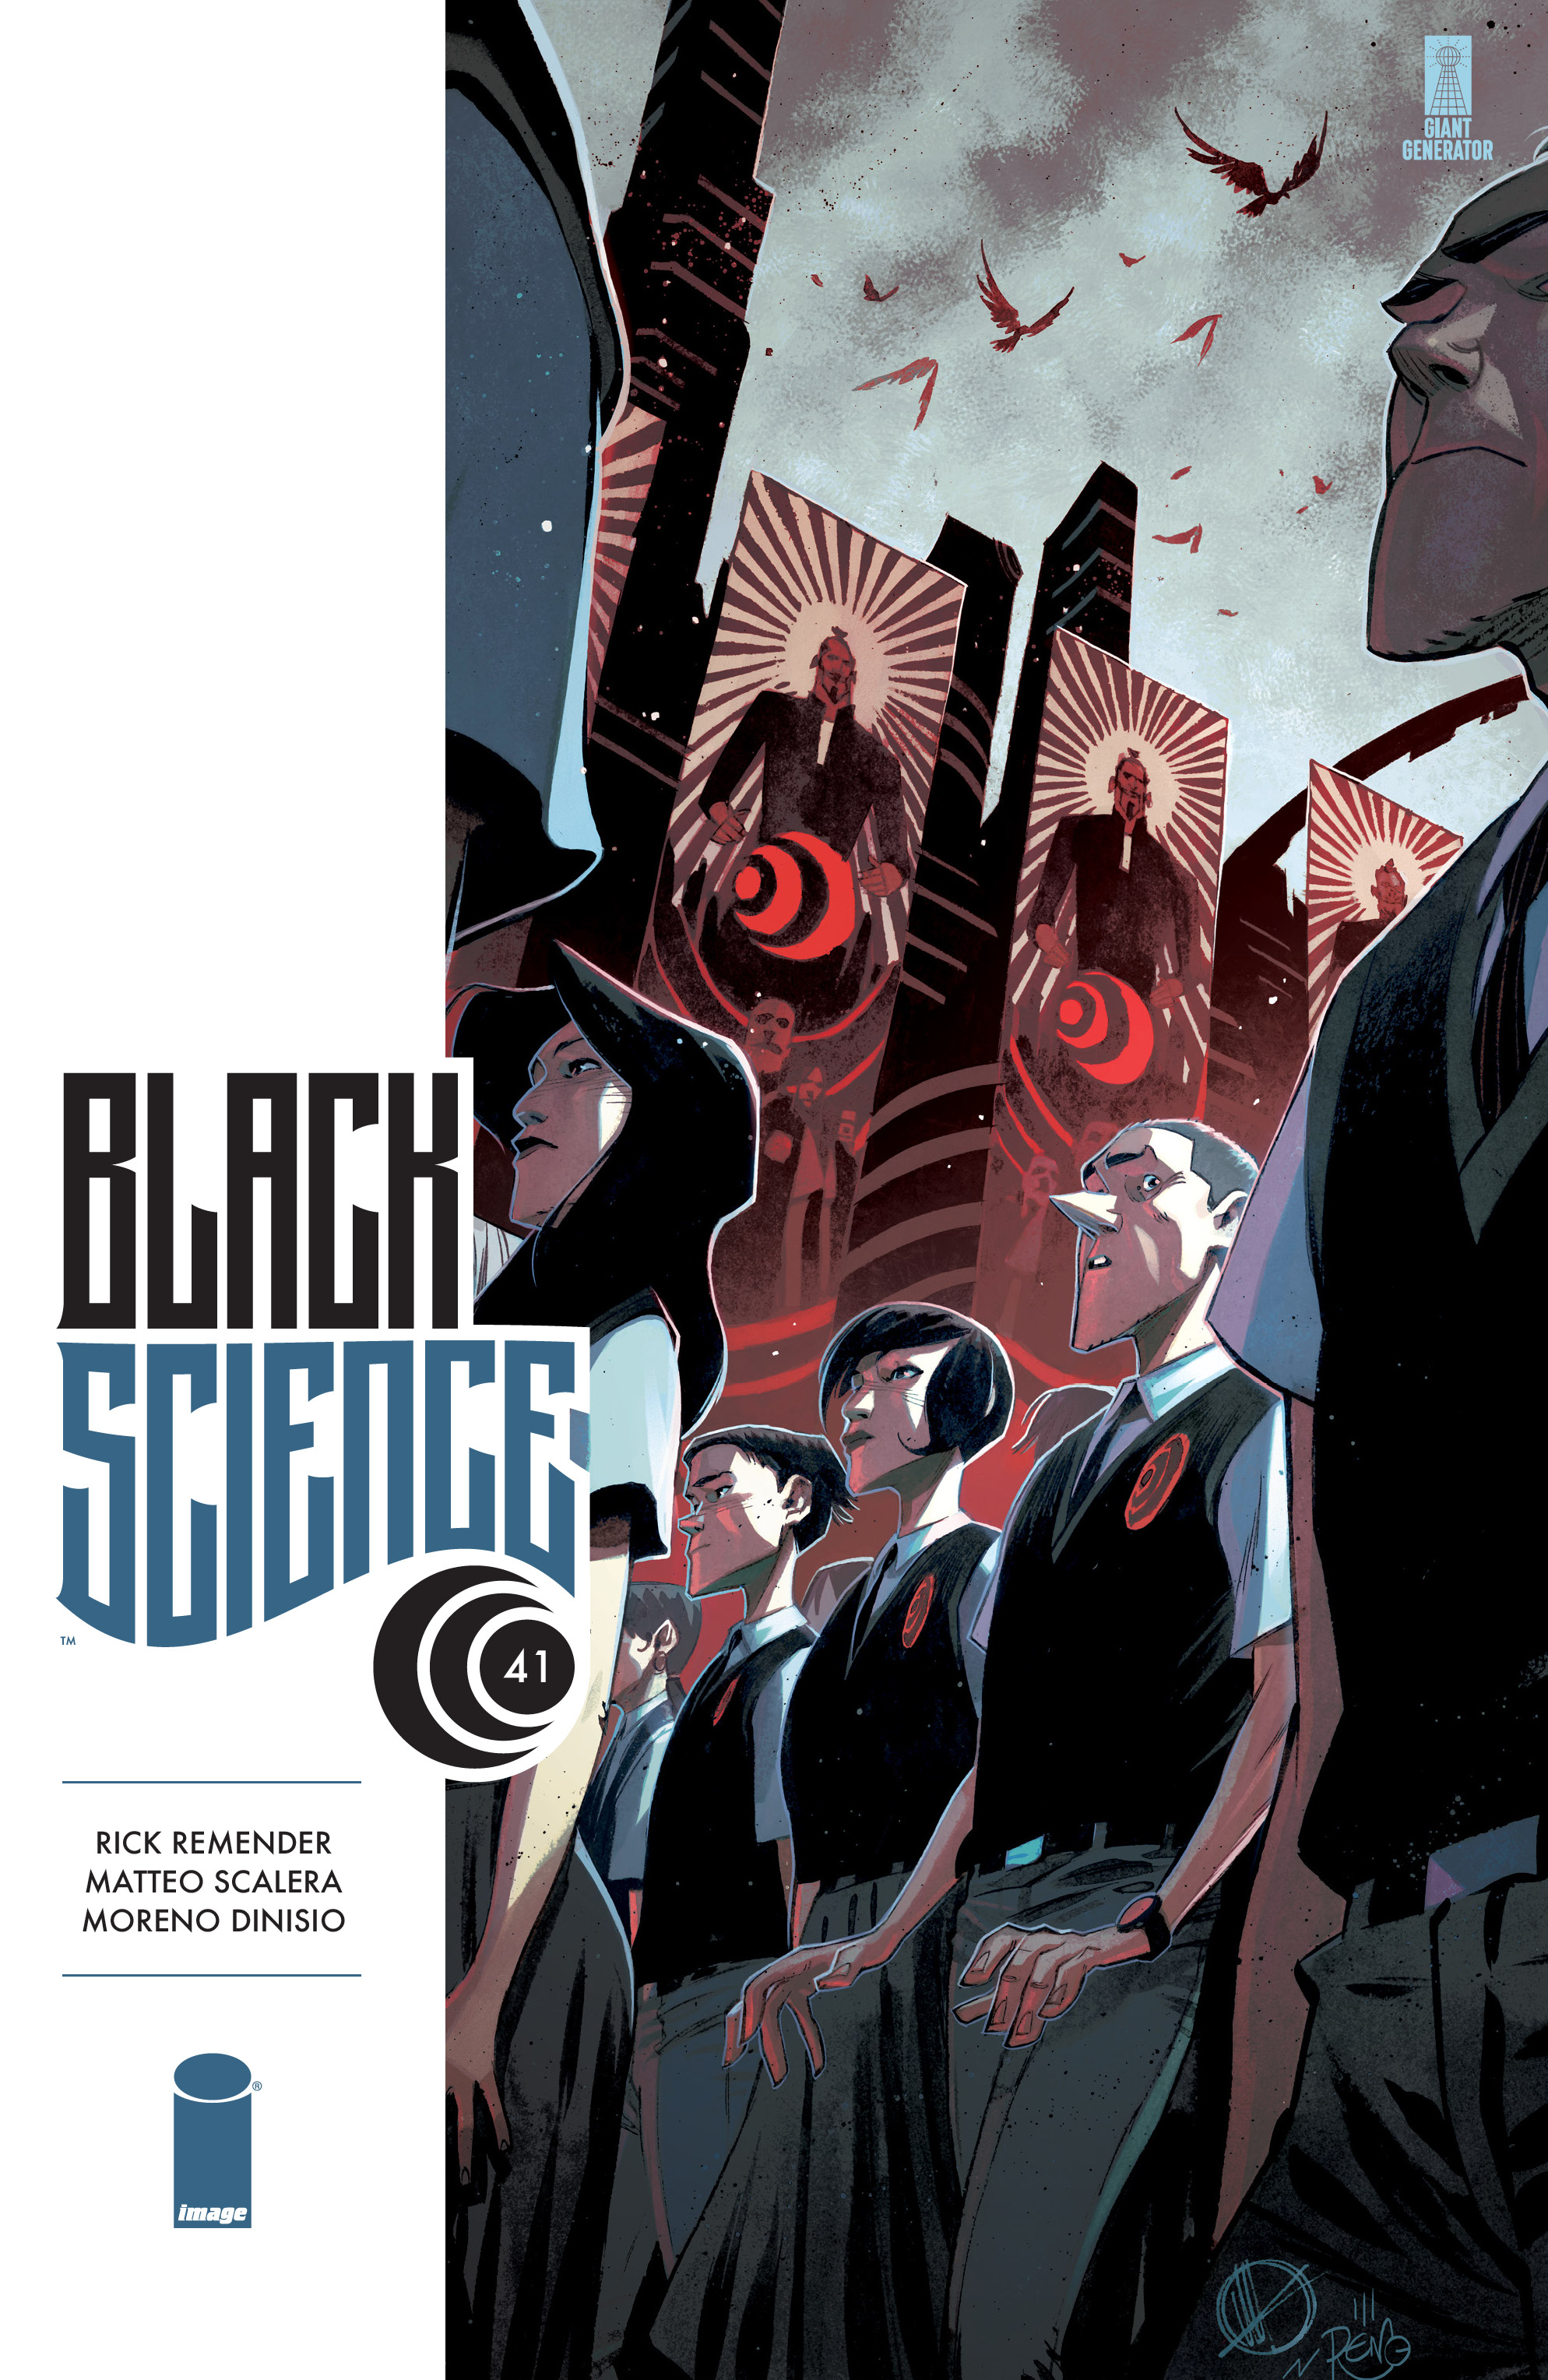 Read online Black Science comic -  Issue #41 - 1